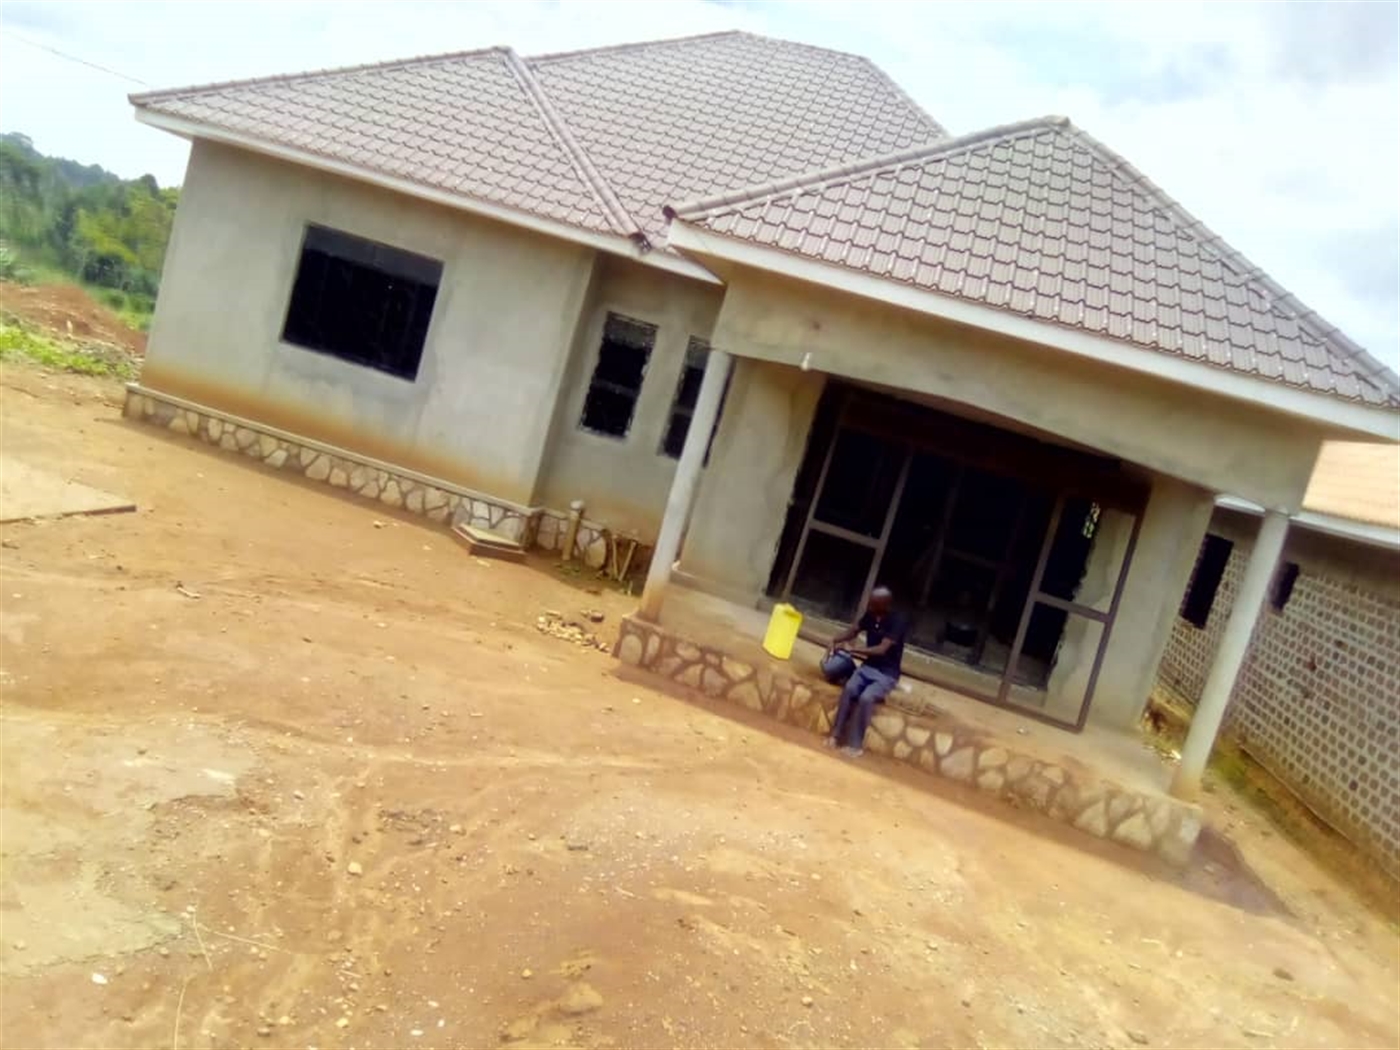 Shell House for sale in Nsuube Mukono